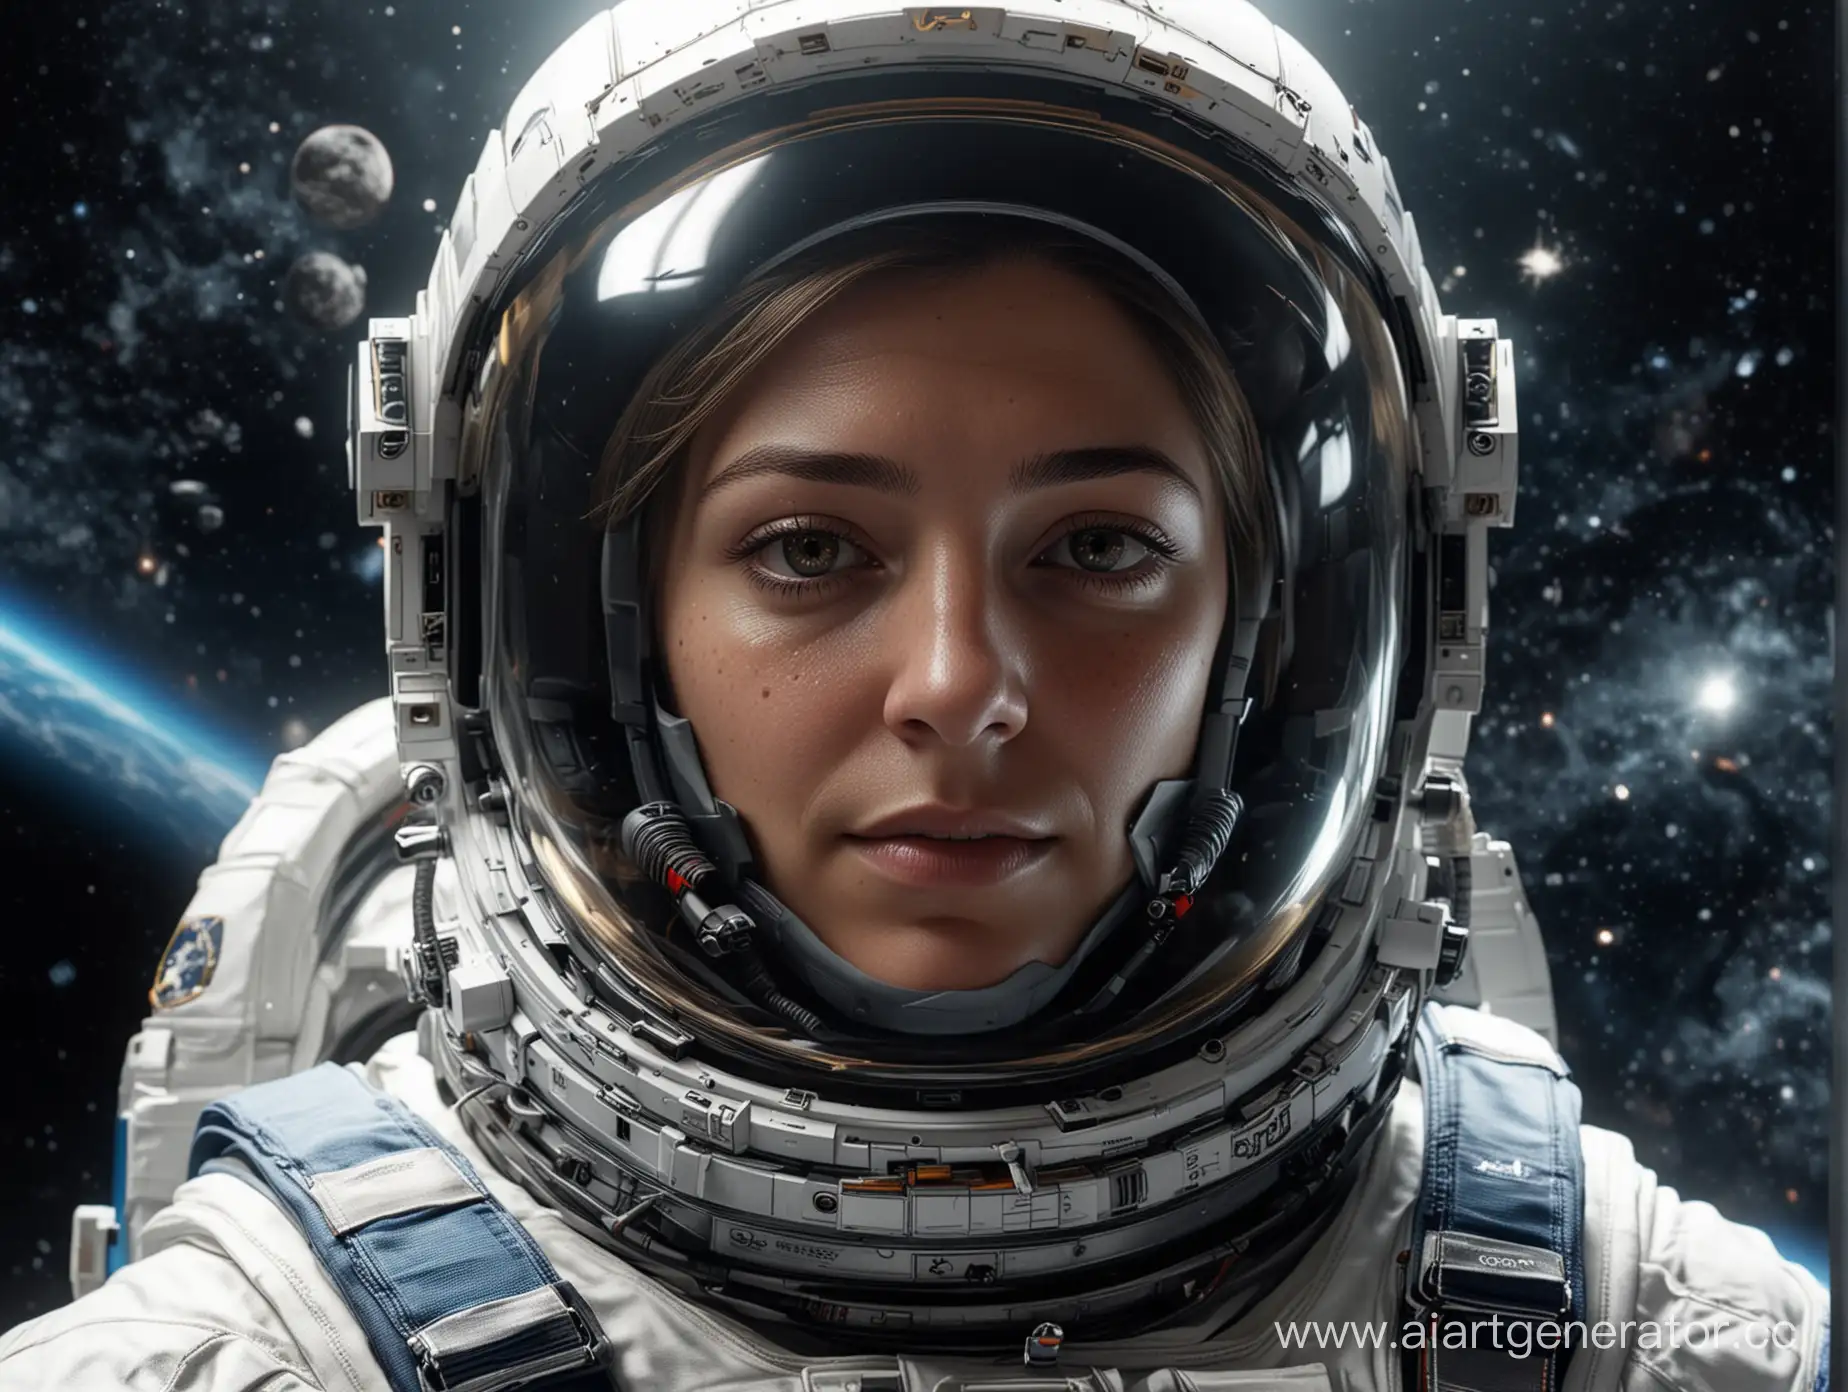 The new XBlast crypto avatar, NOTCOIN, The head of an astronaut in a closed helmet in space, on the protective glass of the helmet it says: HyperXoon, Hyperrealism, 4K